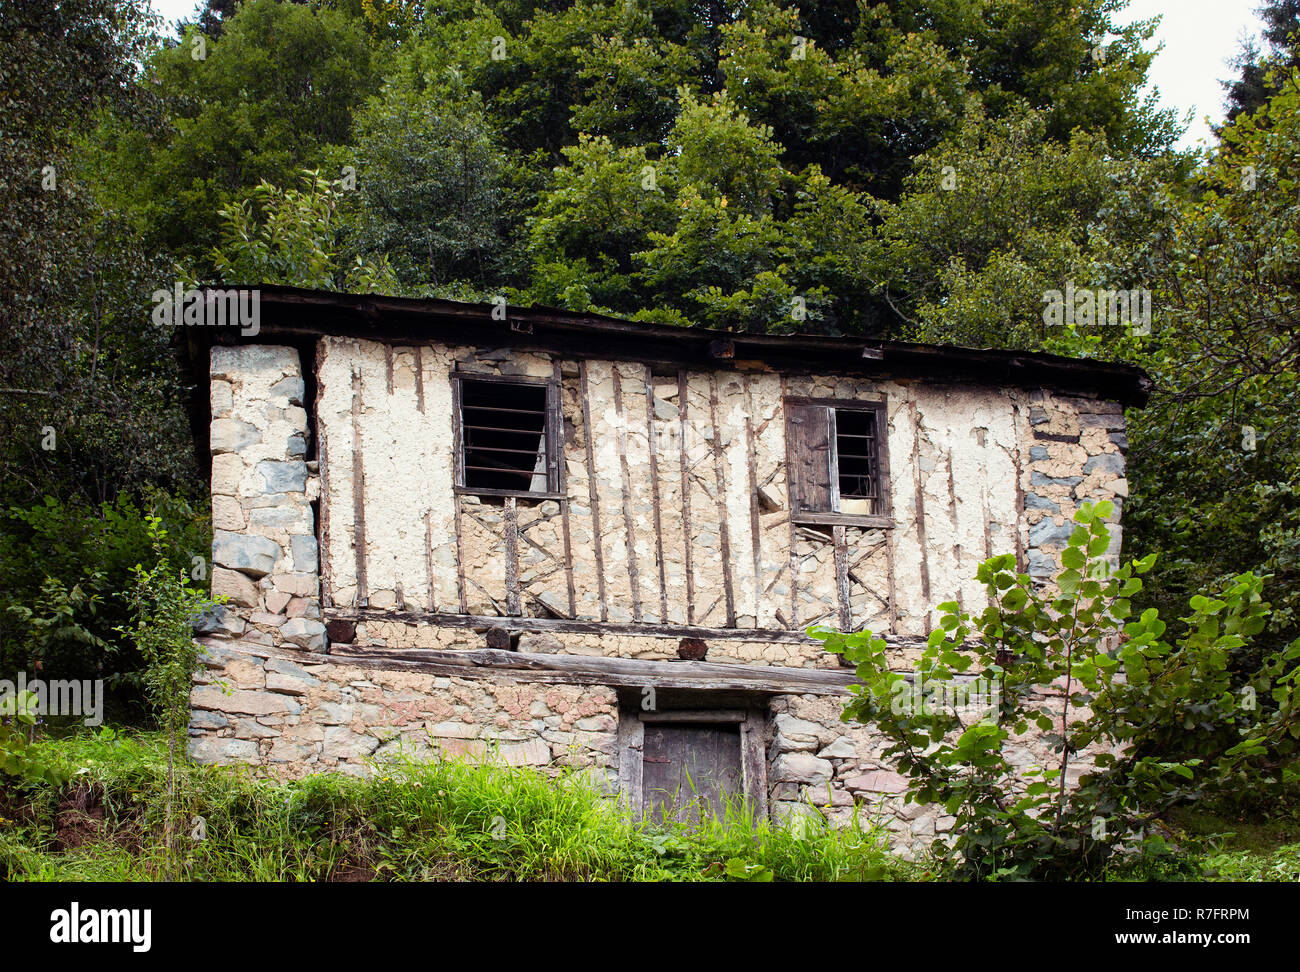 View of traditional, wooden/stone house at high plateau and forest. The image is captured in Trabzon/Rize area of Black Sea region located at northeas Stock Photo